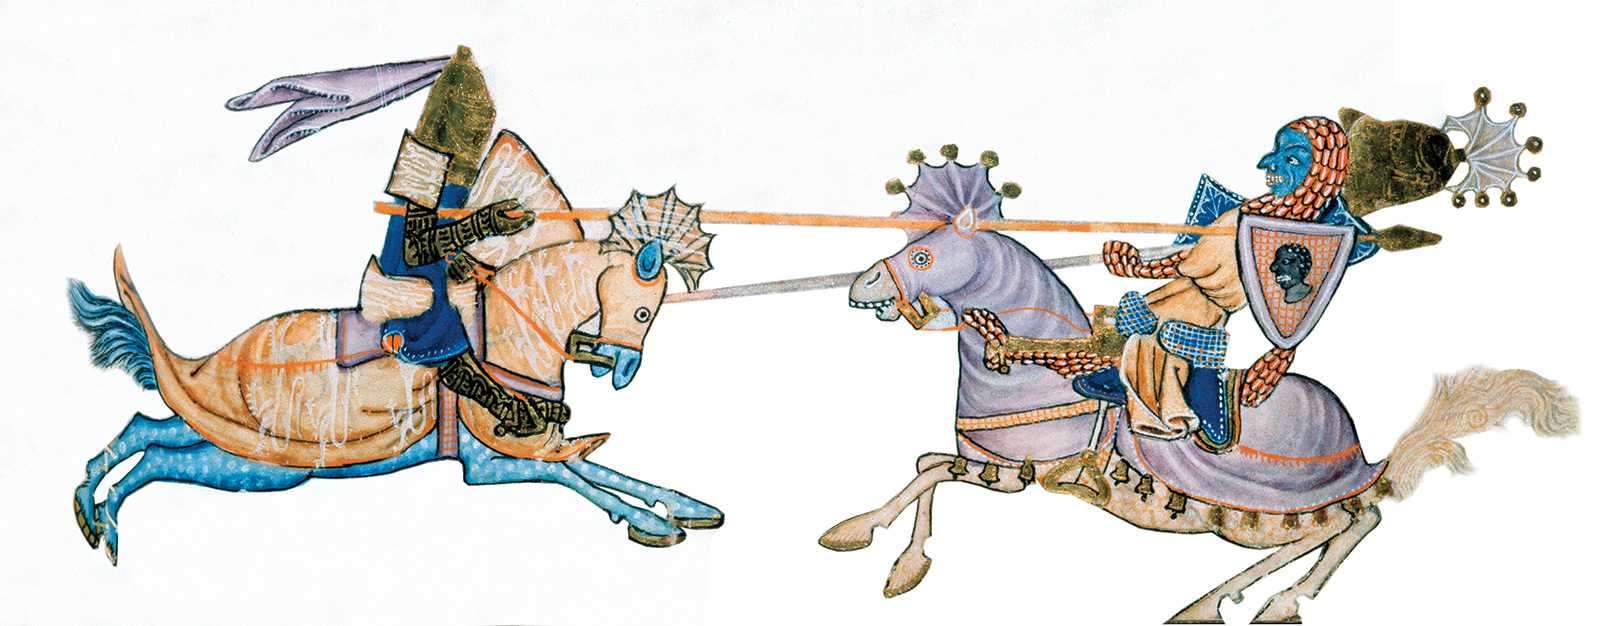 A joust between a crusader (left) and a Muslim, from the Luttrell Psalter, c.1340. Corpus Christ College.